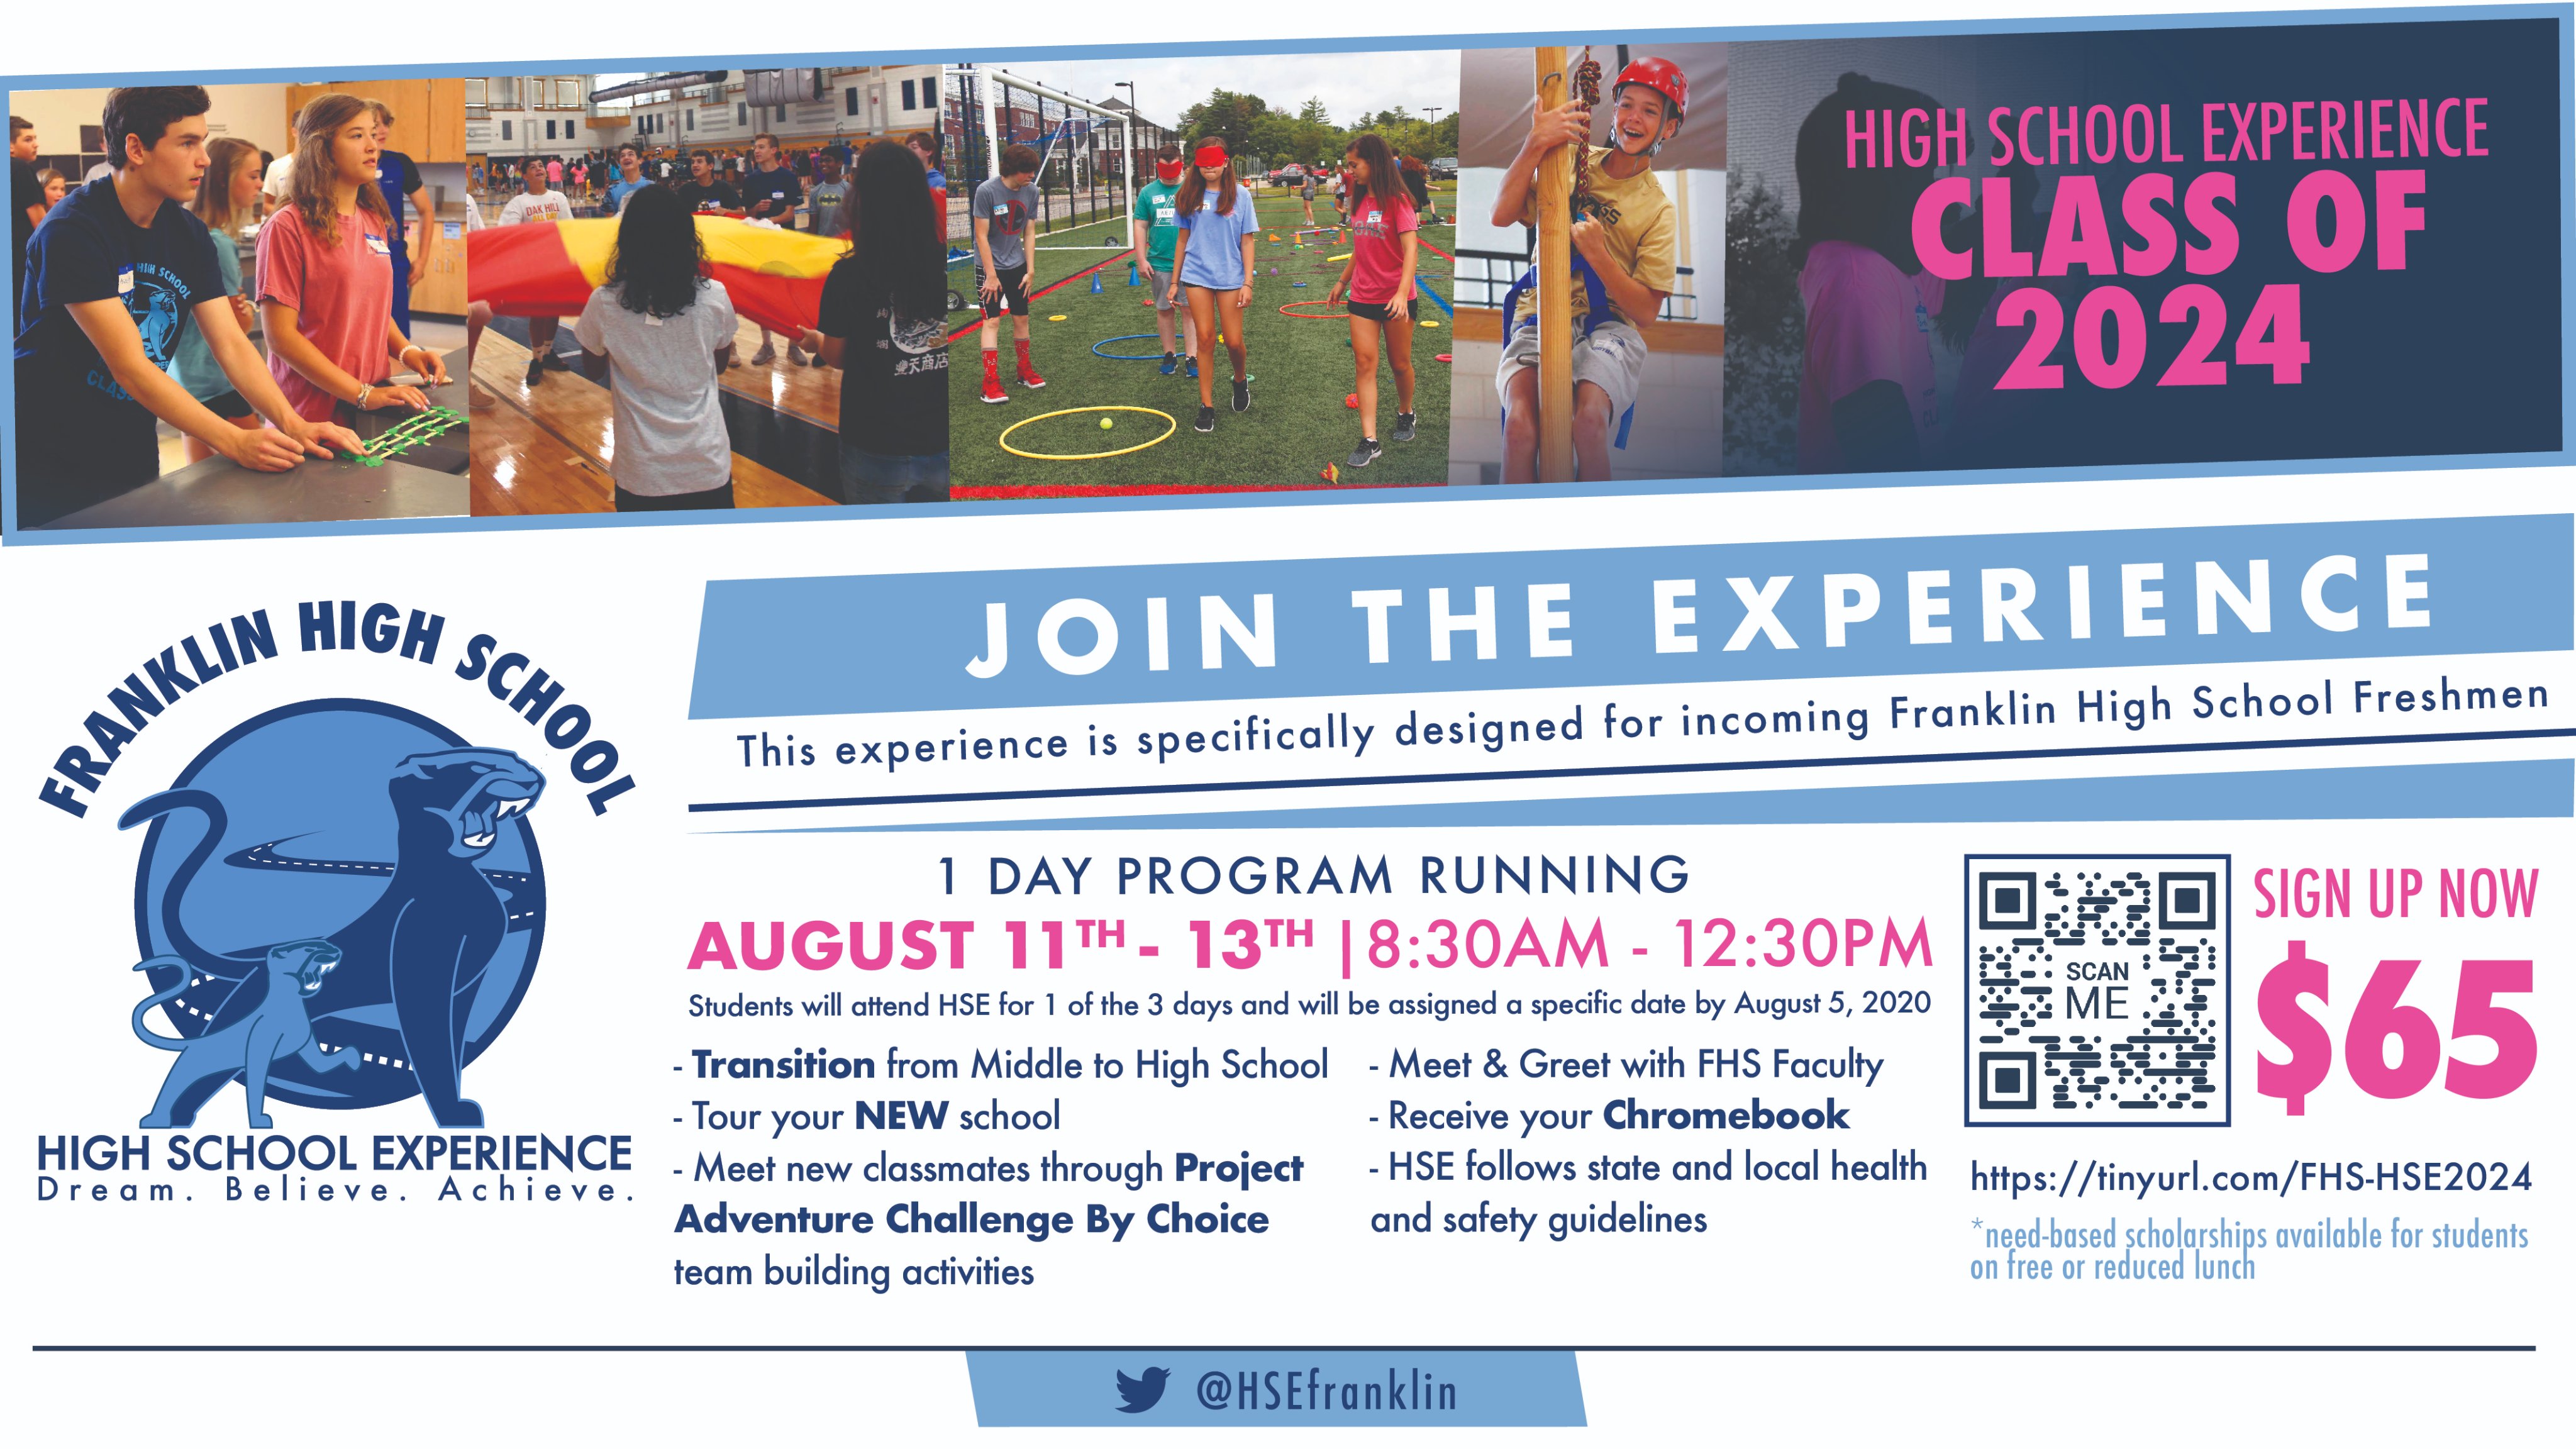 Register for the FHS High School Experience in August